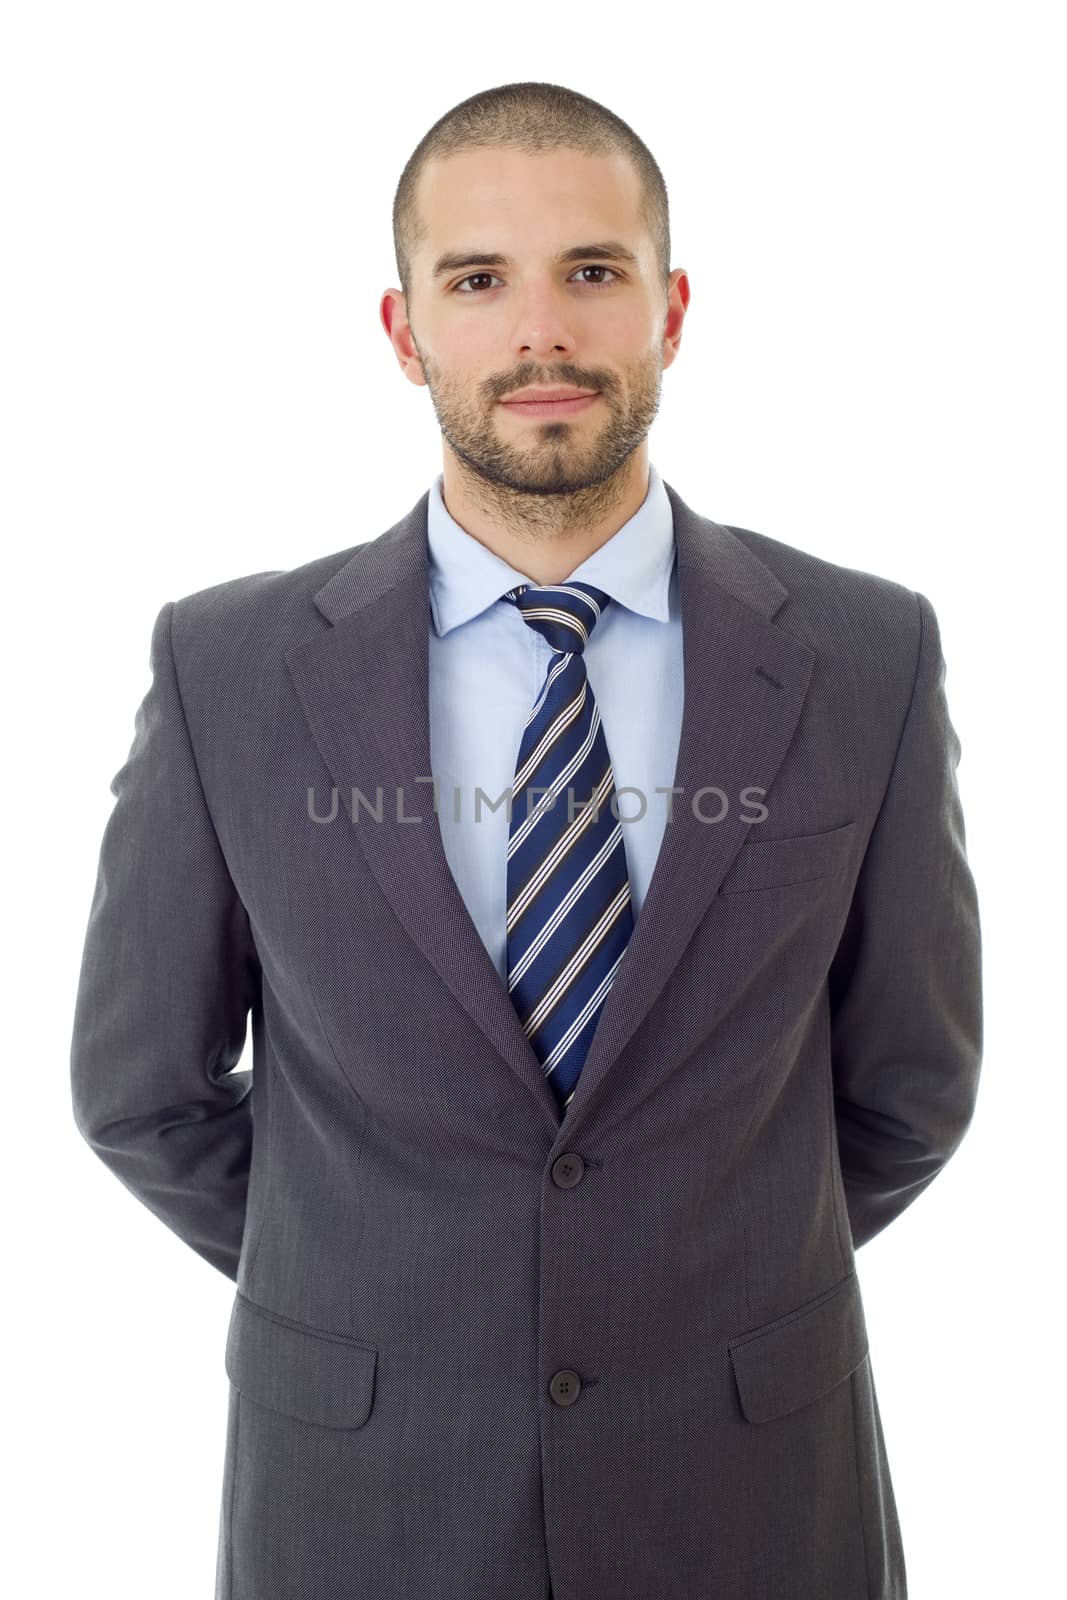 happy business man portrait isolated on white